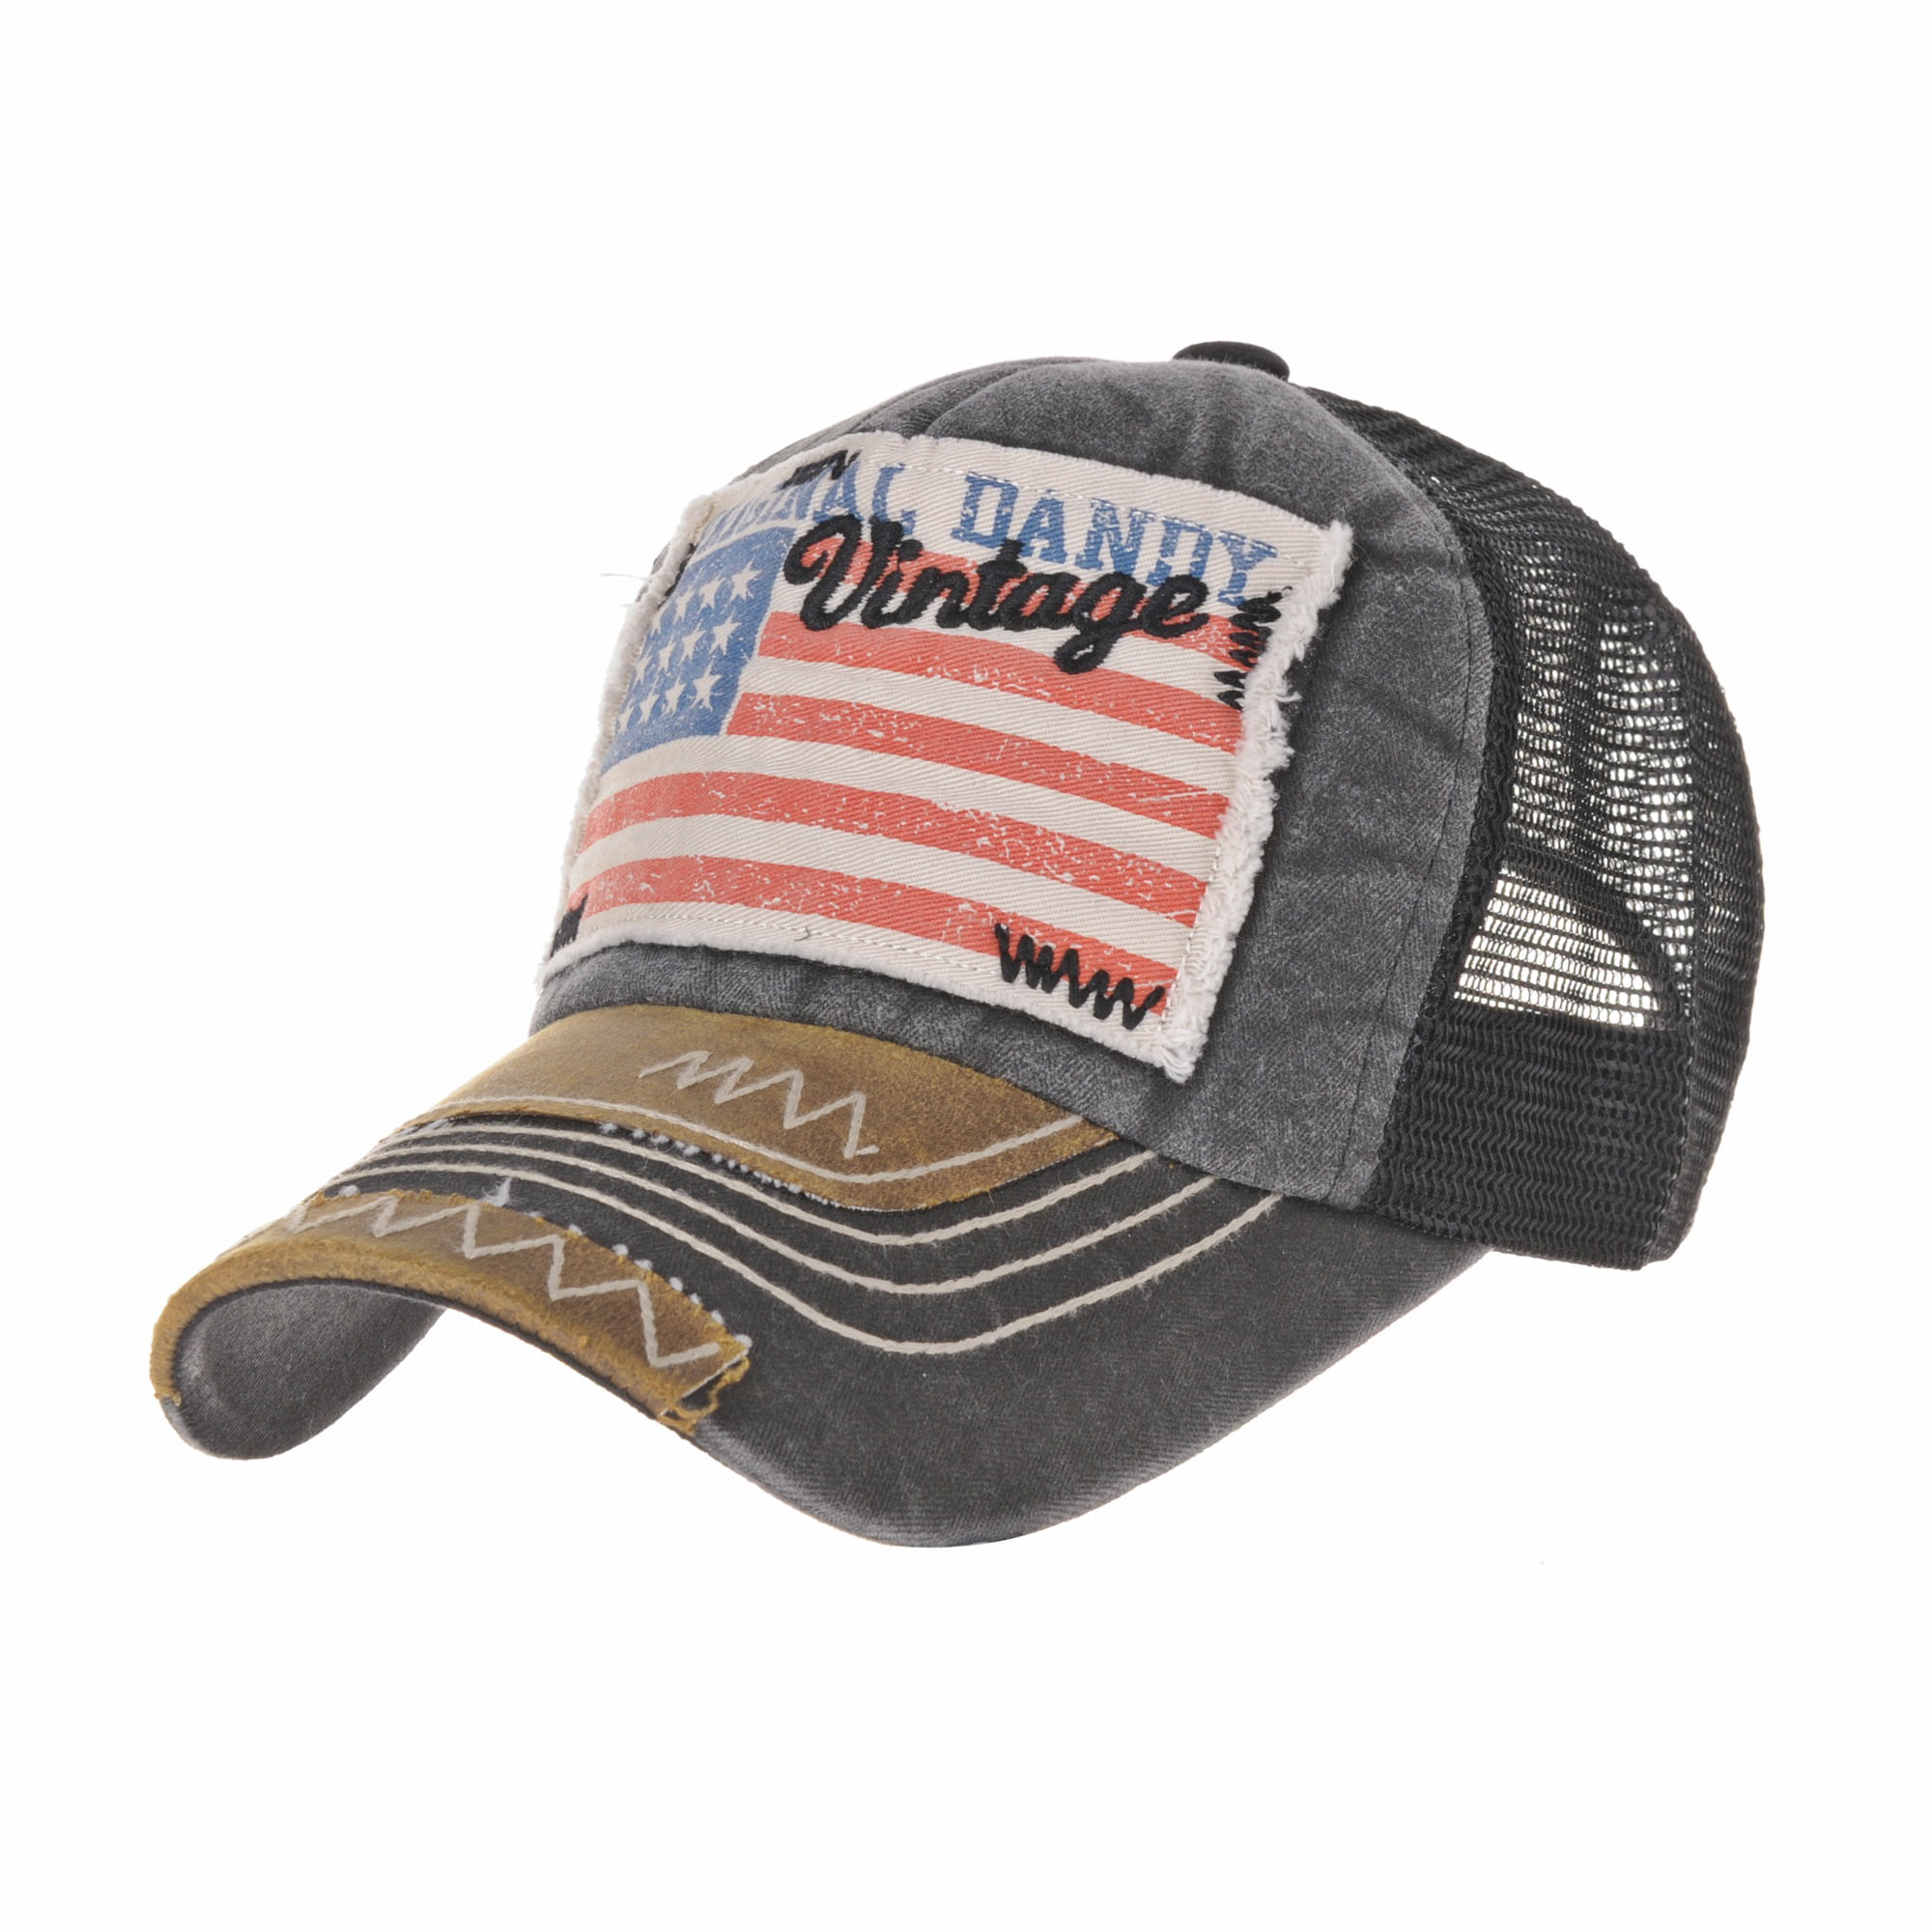 Vintage Style Distressed Trucker Hat with American Flag Patch 